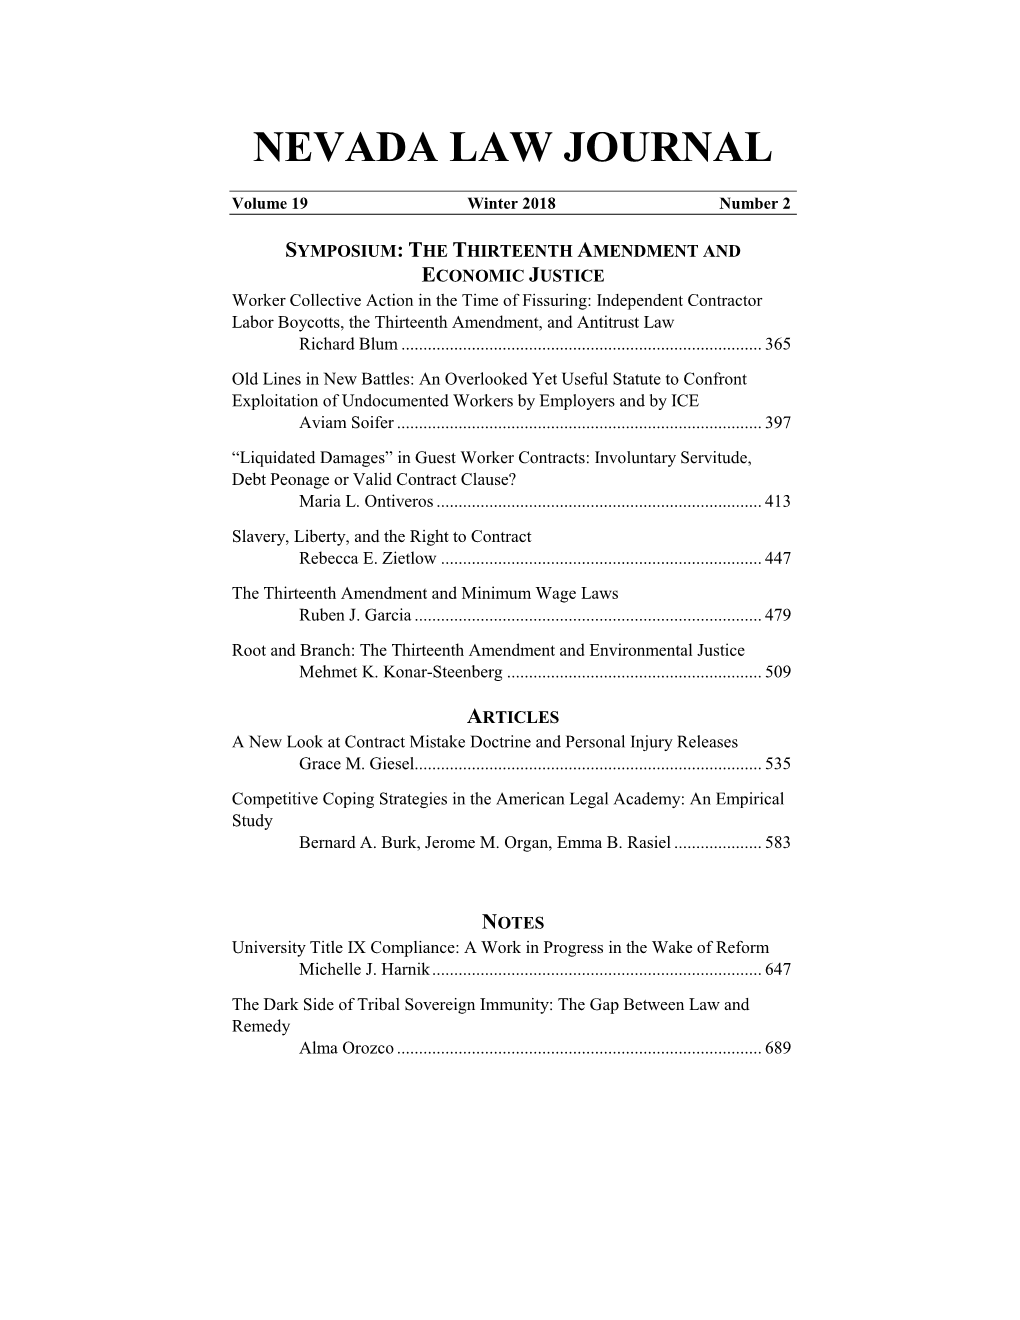 Table of Contents, Editorial Board, Law School Faculty And